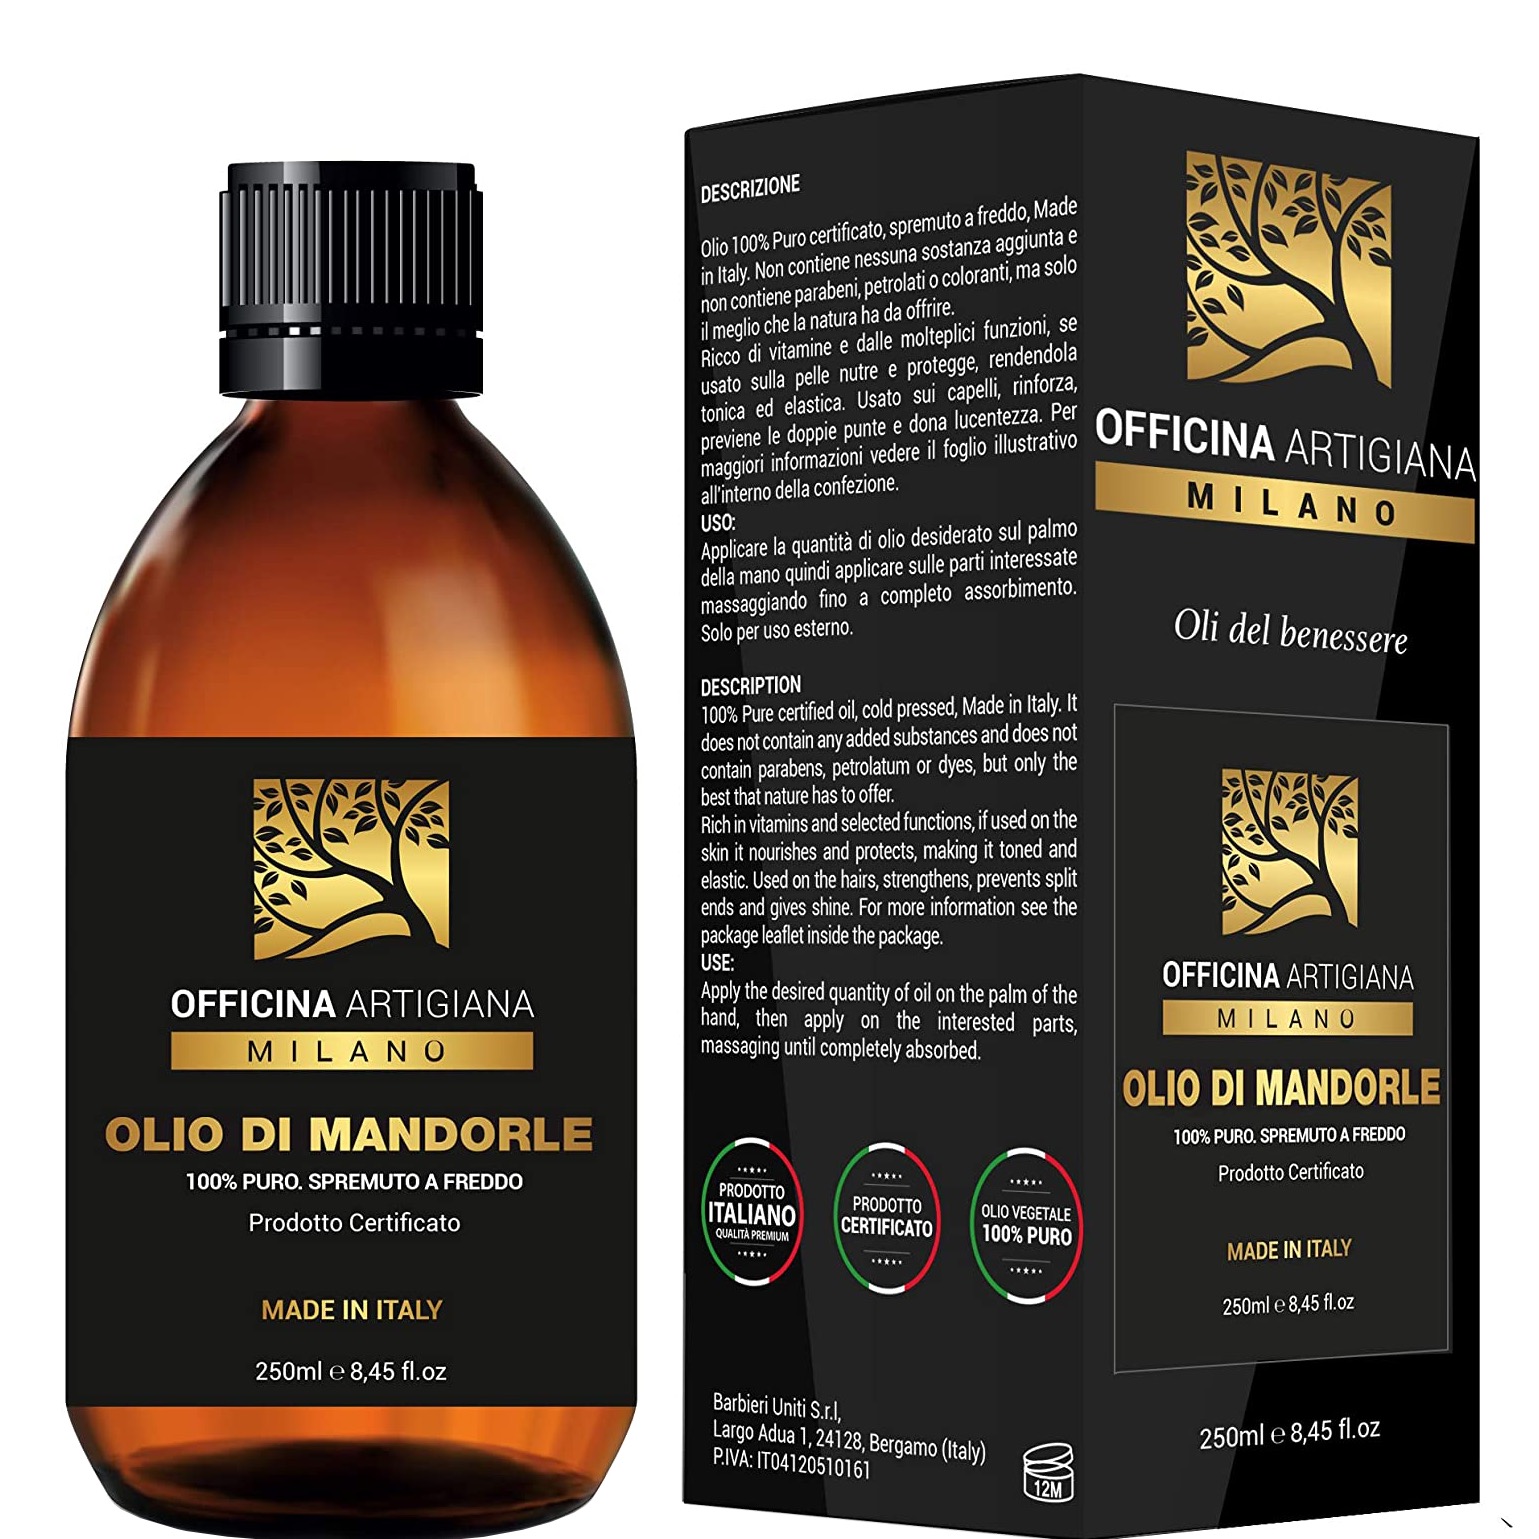 100% Pure Certified Almond Oil